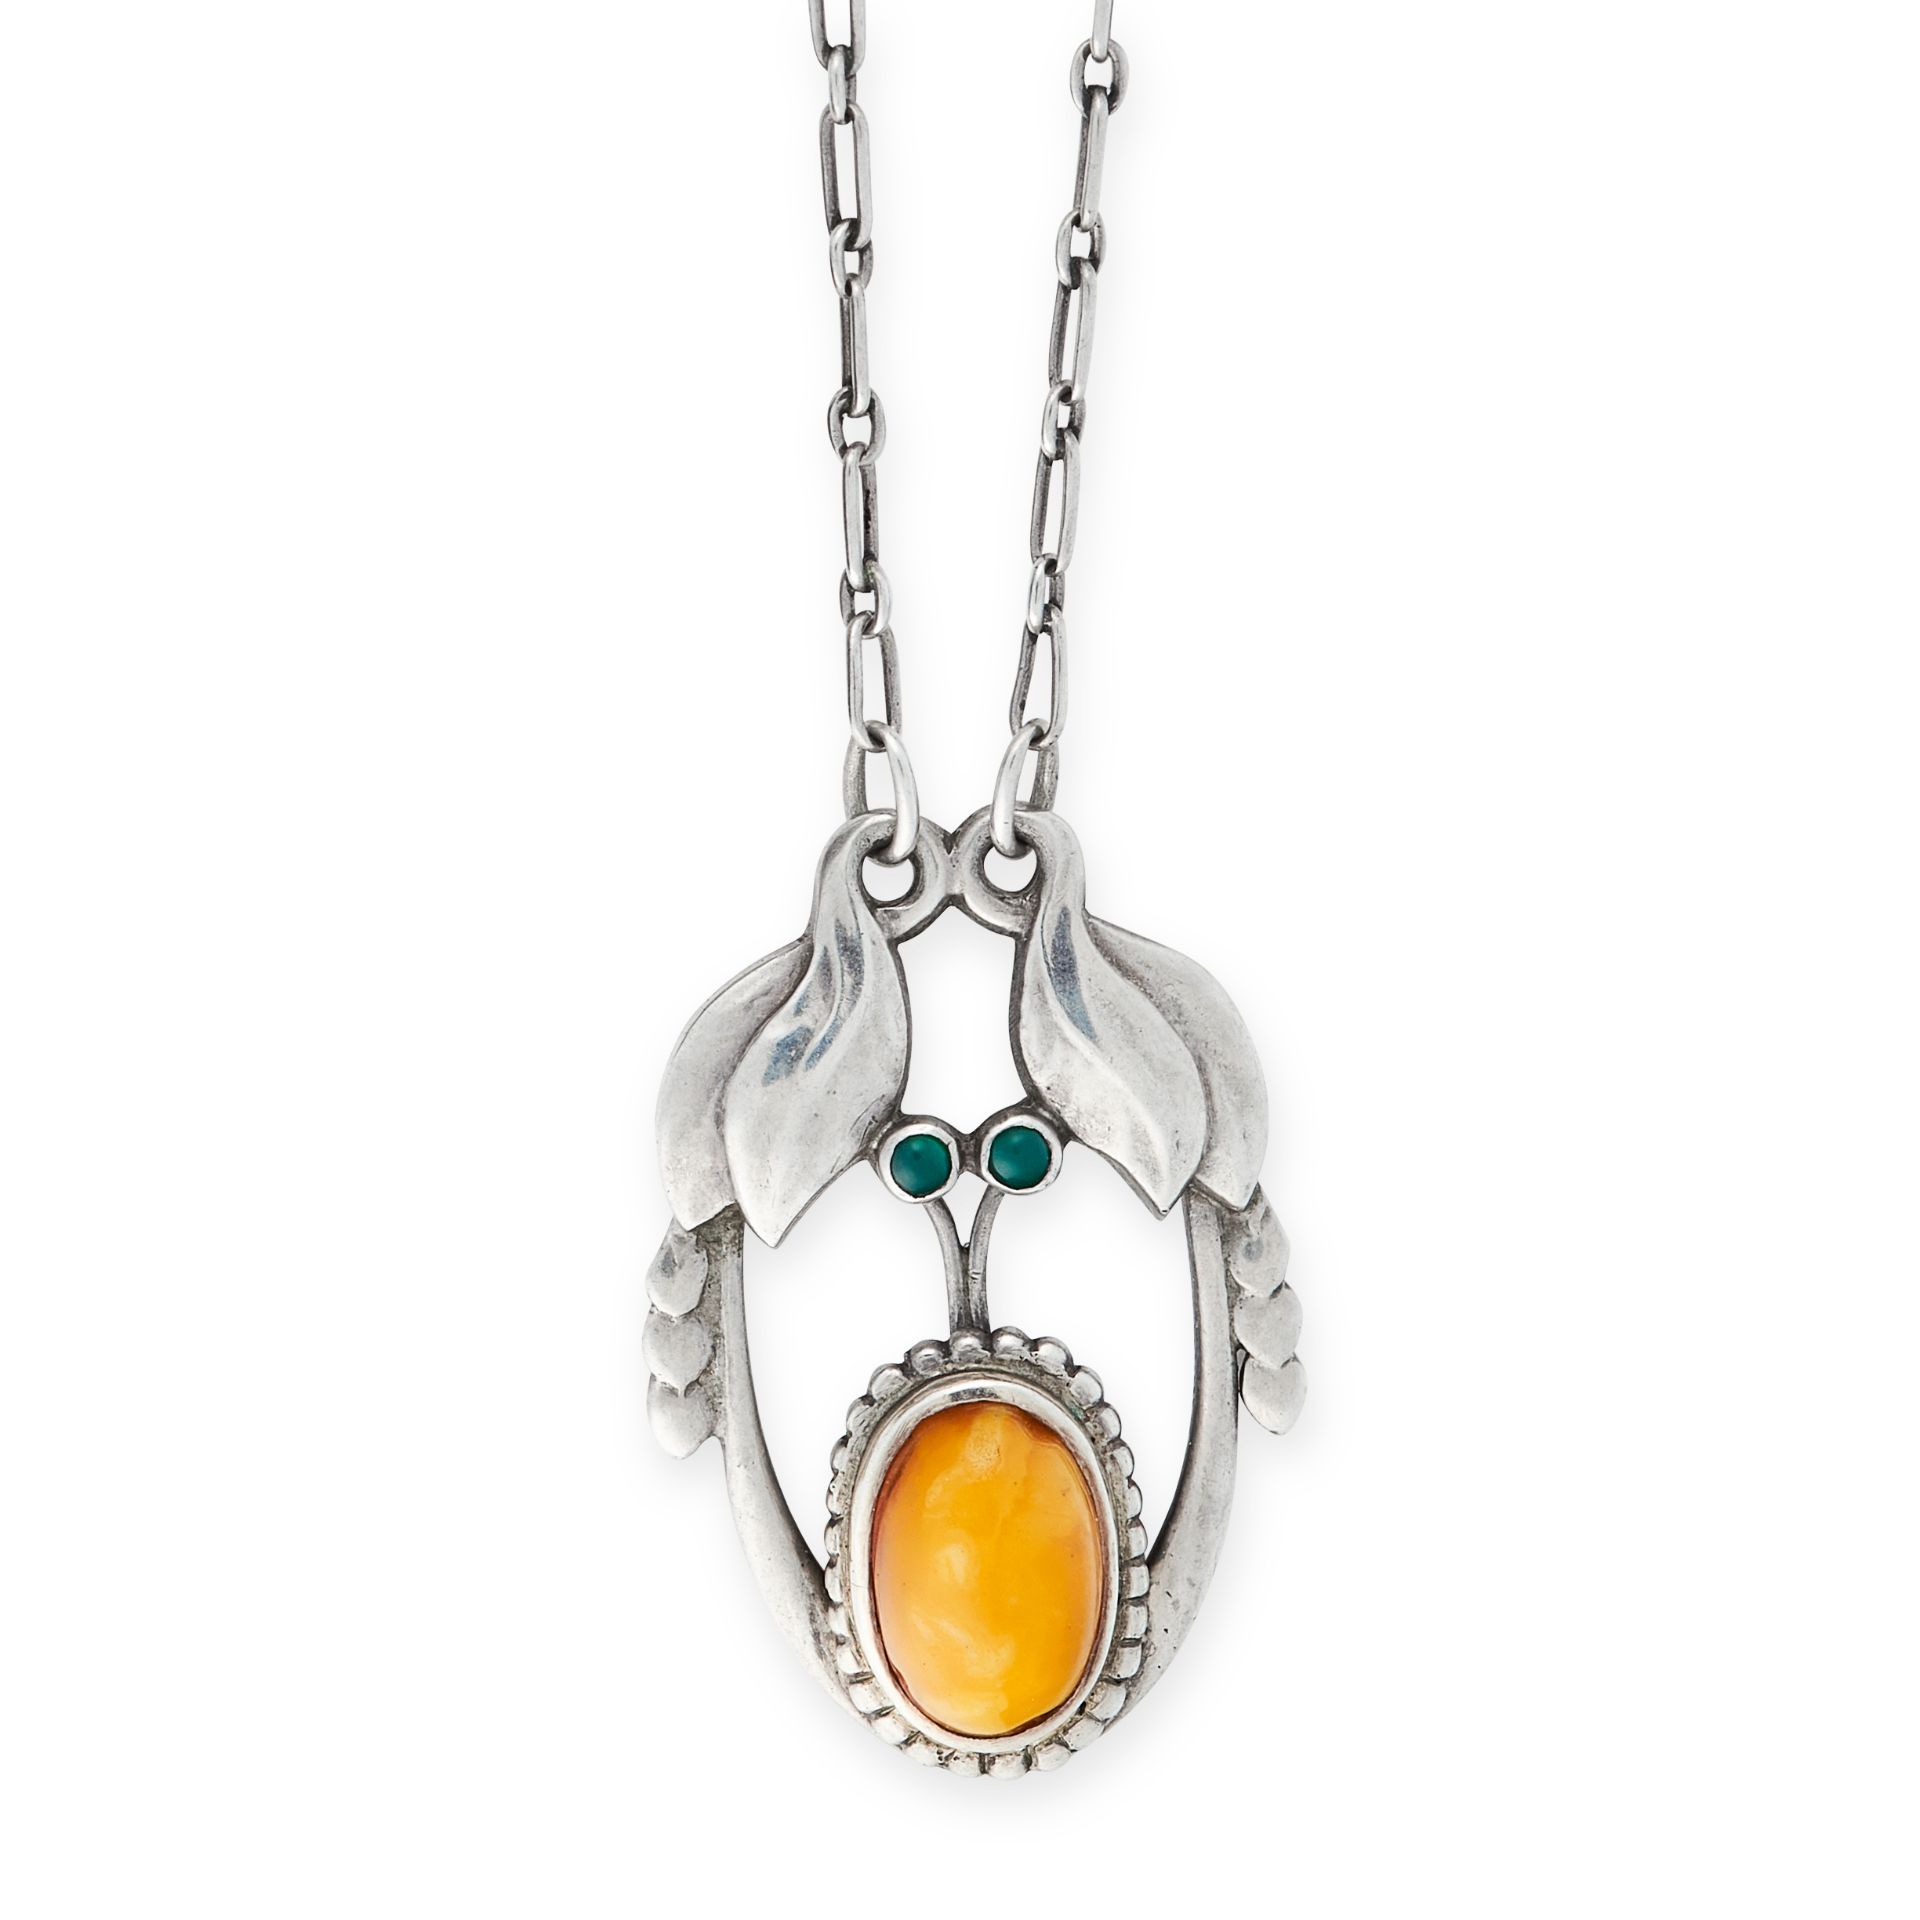 AN ANTIQUE AMBER AND CHRYSOPRASE PENDANT NECKLACE, GEORG JENSEN 1904-1908 in silver, design number